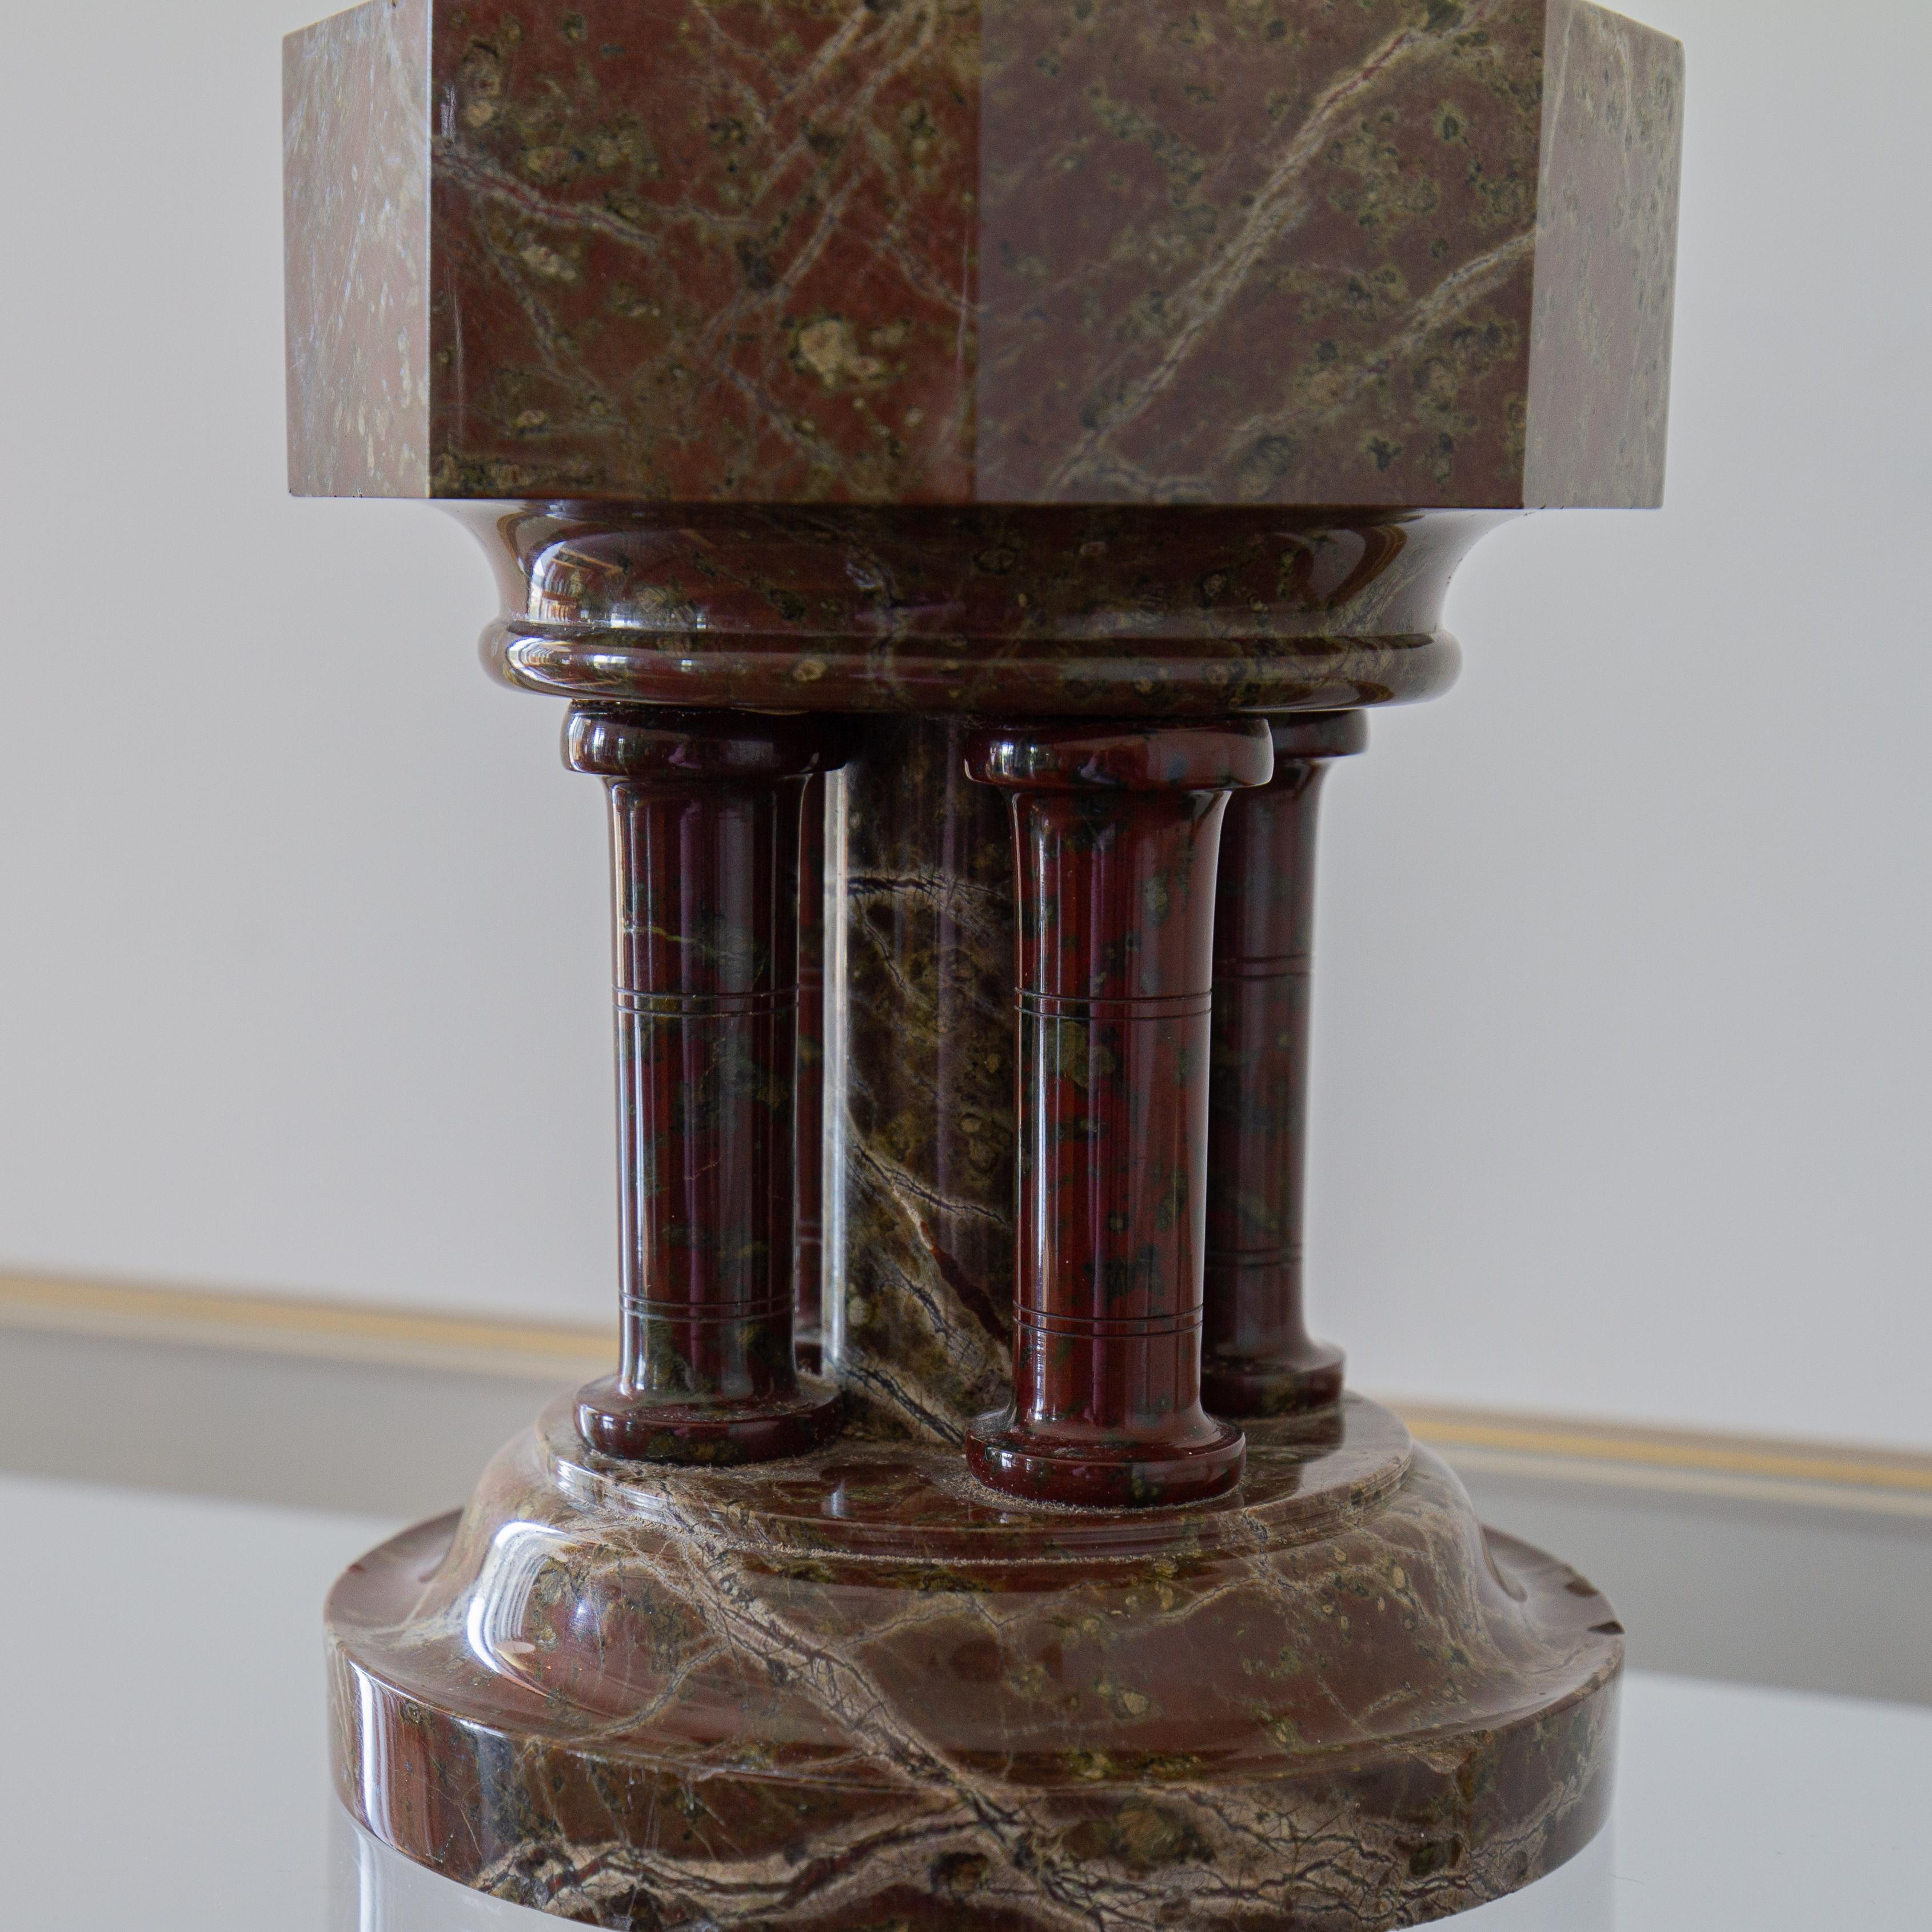 A 19th century Serpentine marble, possibly Cornish, miniature font with an octagonal reservoir set atop a cluster of five columns, circa 1870.

In the 18th and 19th centuries, baptisms were ordered privately as status of high society. These